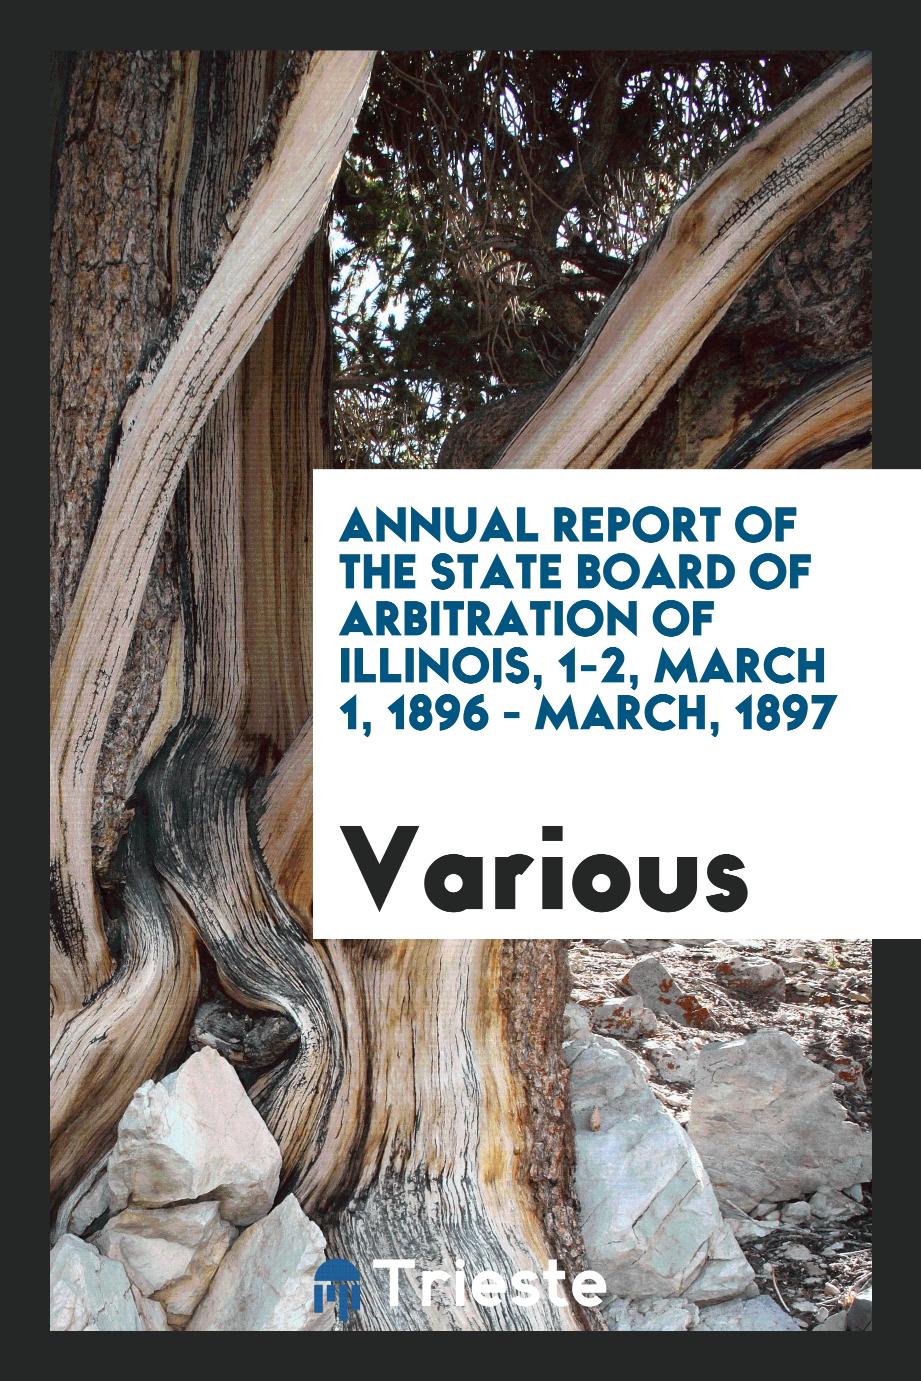 Annual report of the state board of arbitration of Illinois, 1-2, March 1, 1896 - March, 1897